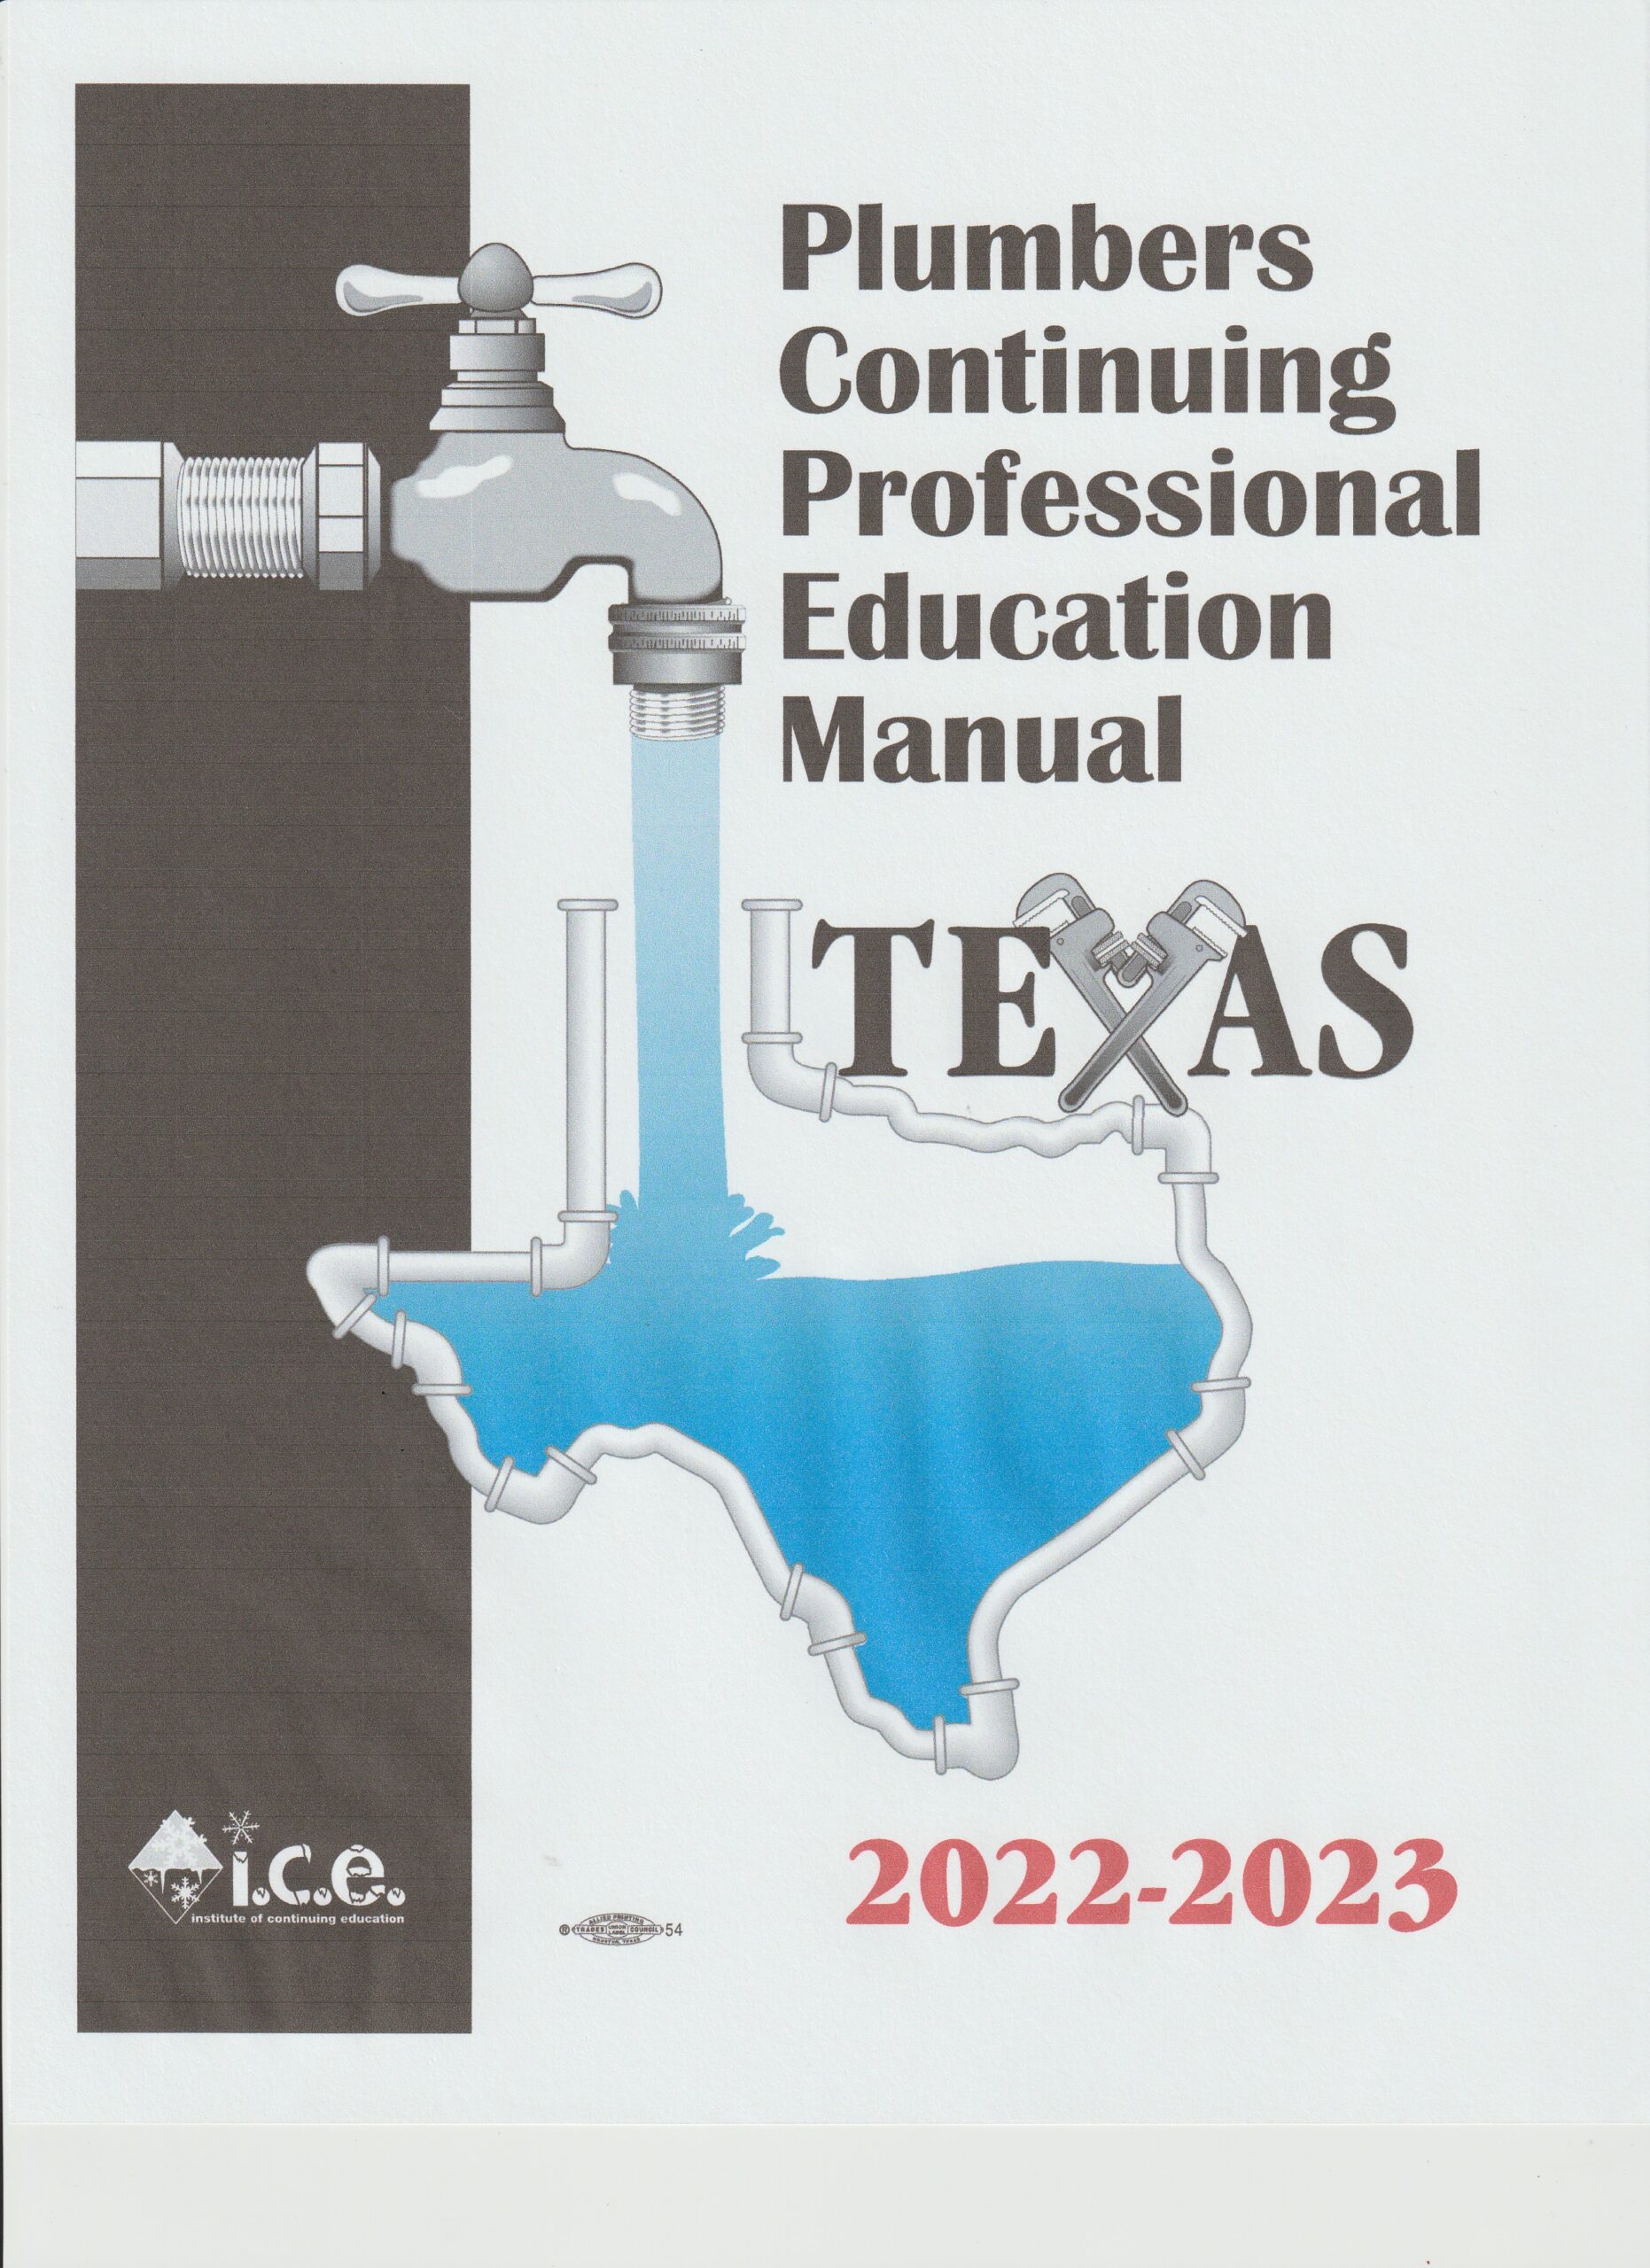 https://pioneereducationalservices.com/wp-content/uploads/2022/09/Ice-book-2022-23-scaled.jpg